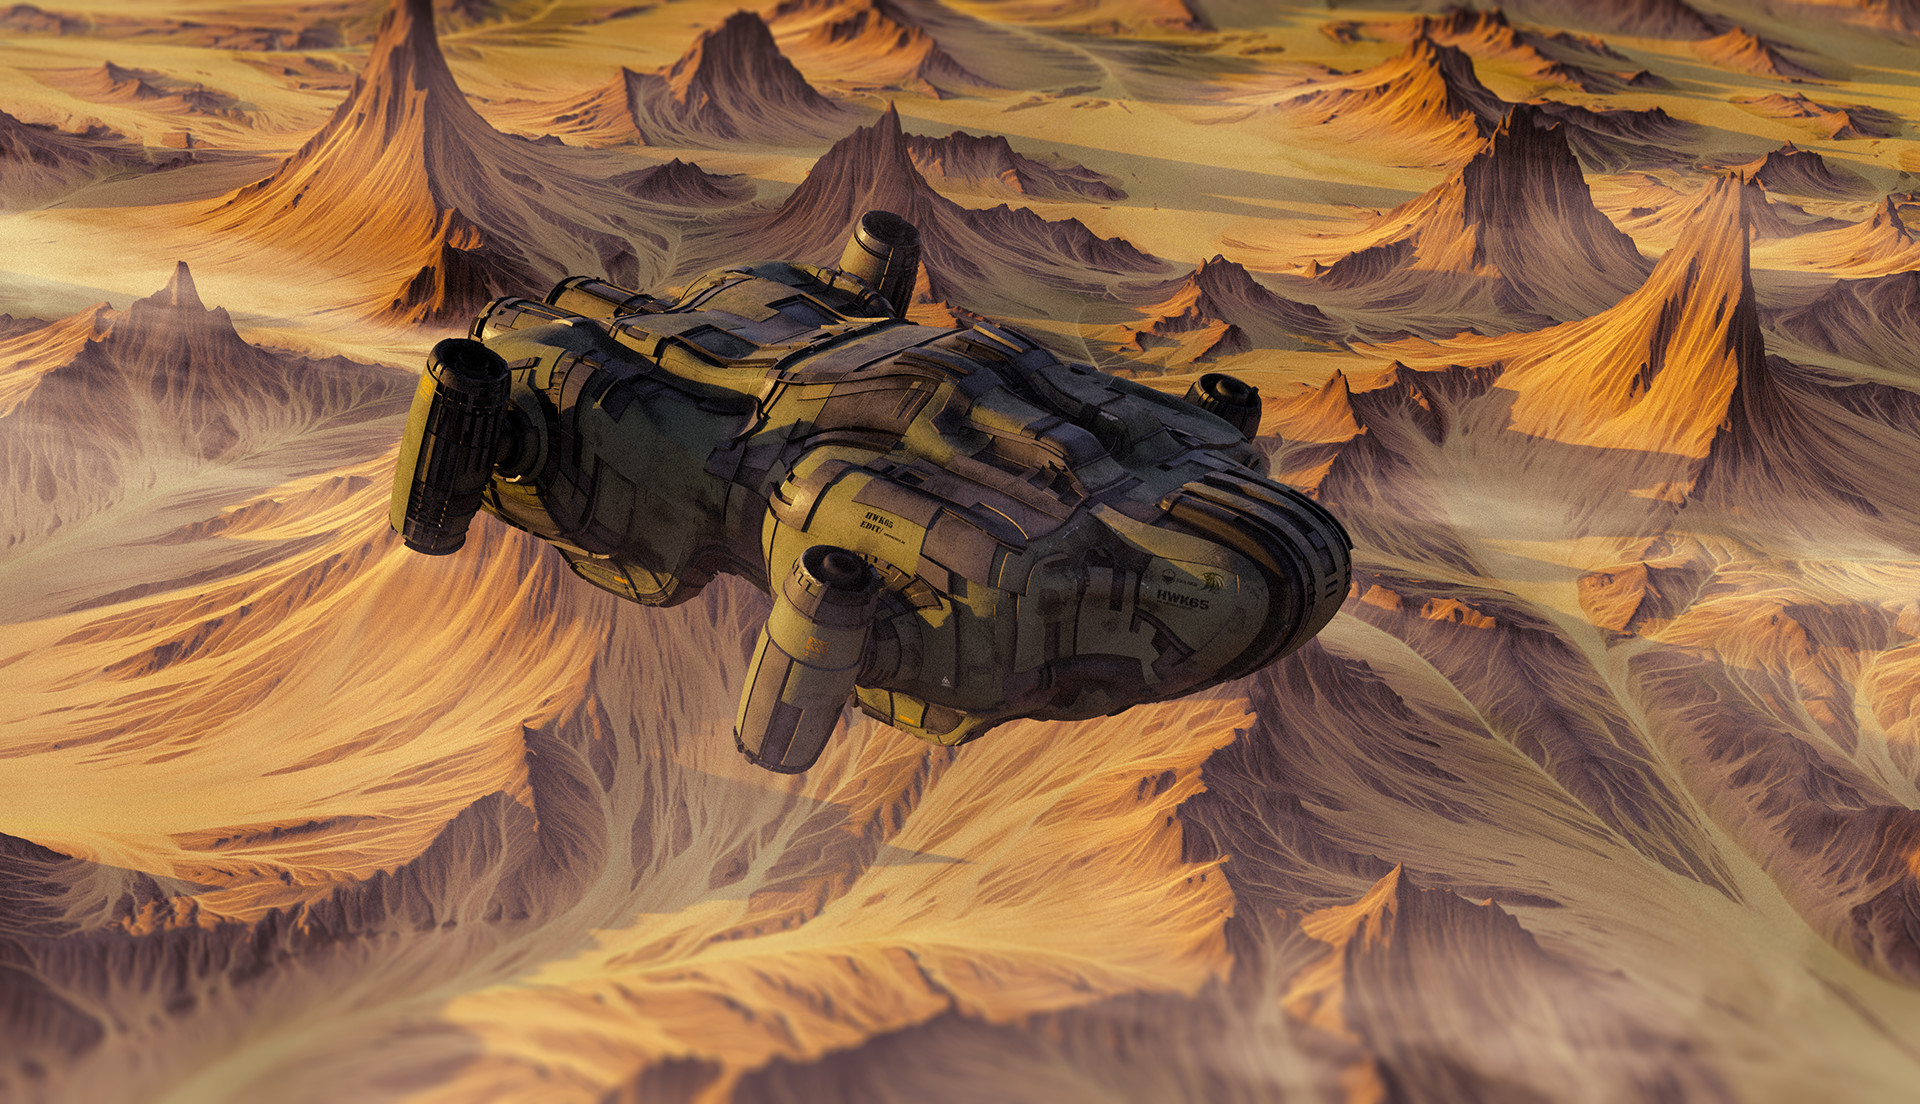 General 1920x1104 science fiction spaceship yellow artwork rock formation sand mountains ridges fantasy art futuristic planet aircraft technology detailed turbines mist high angle vehicle